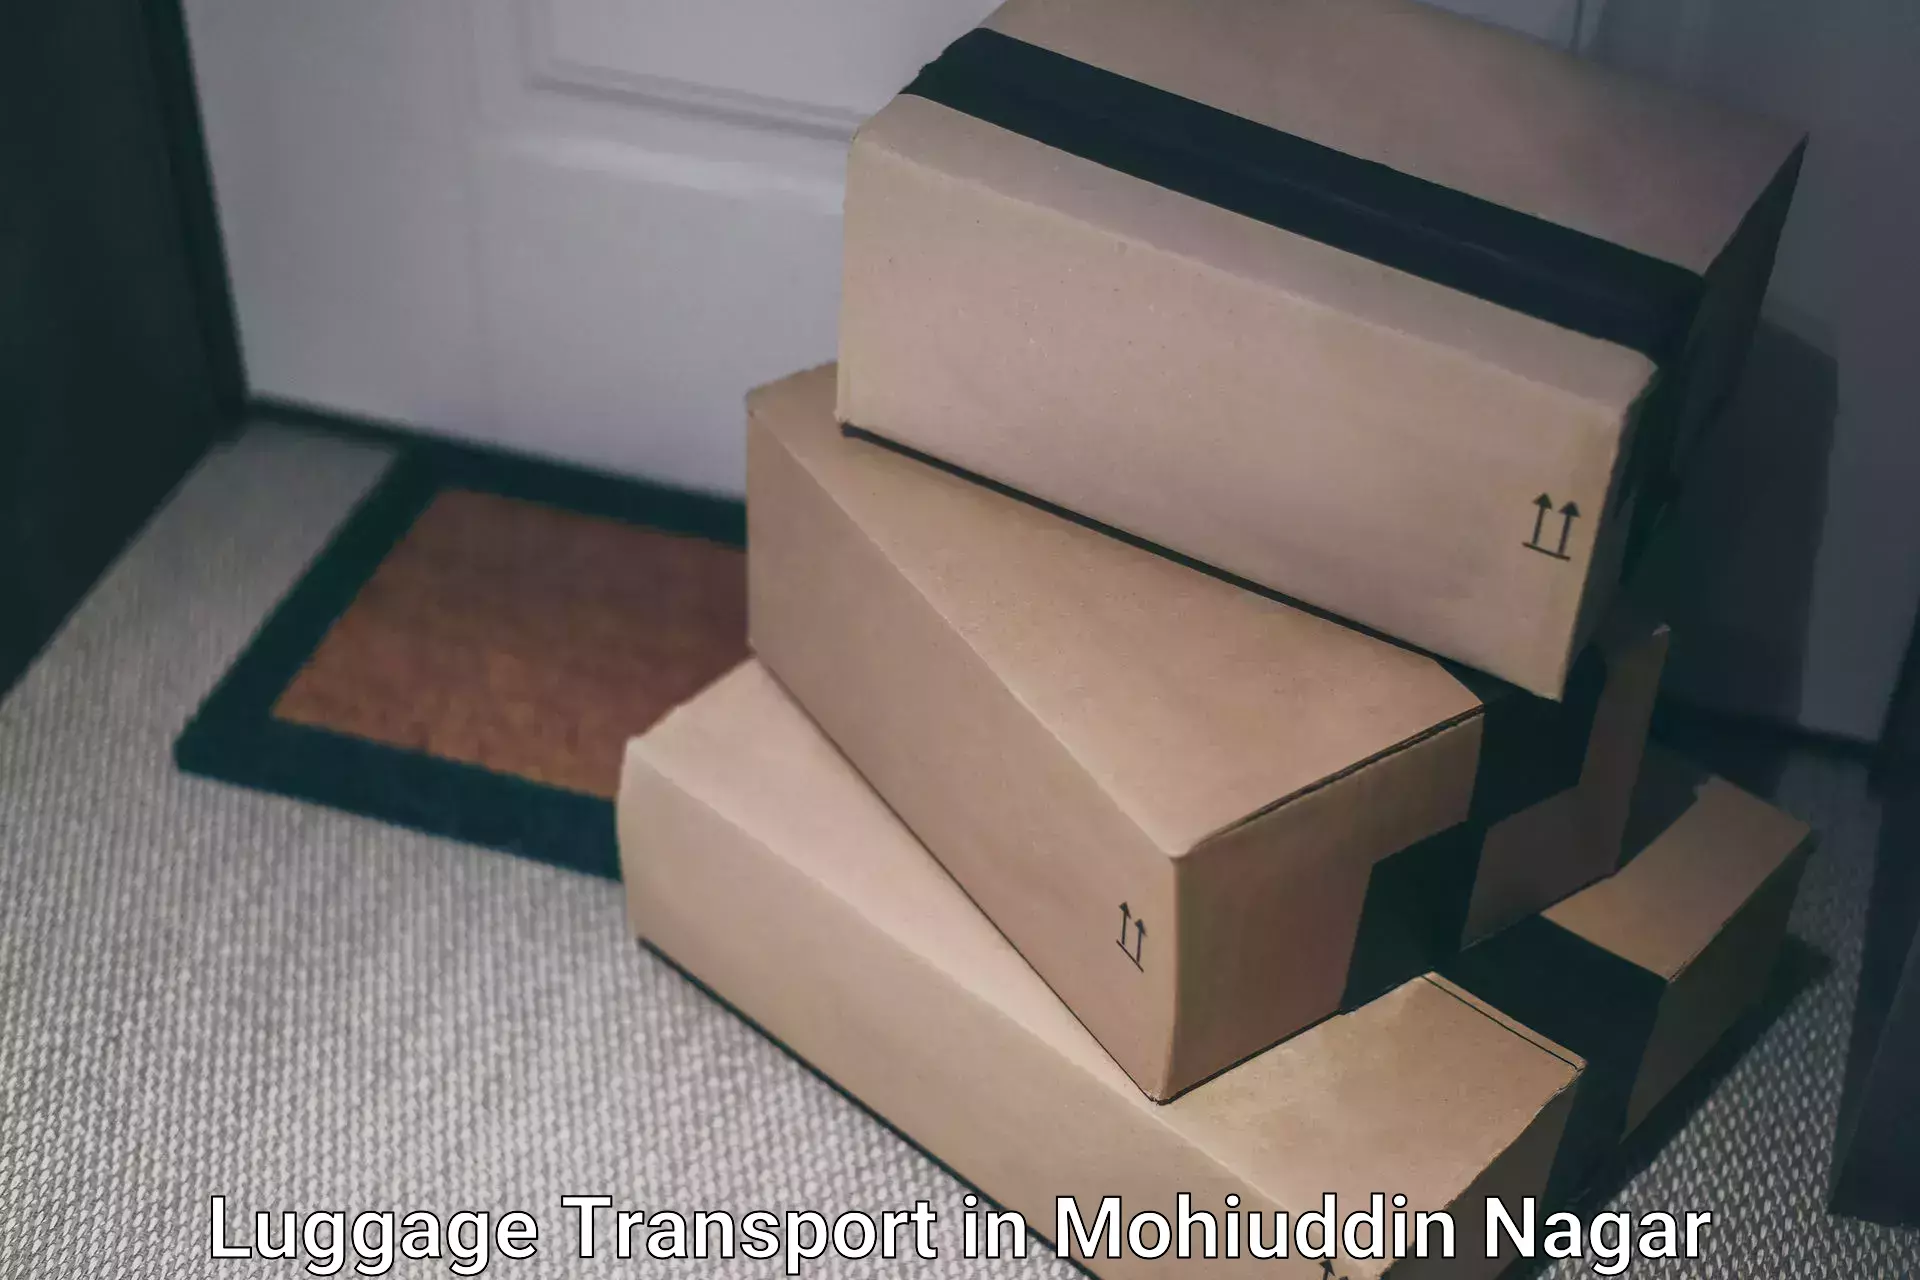 Baggage delivery technology in Mohiuddin Nagar